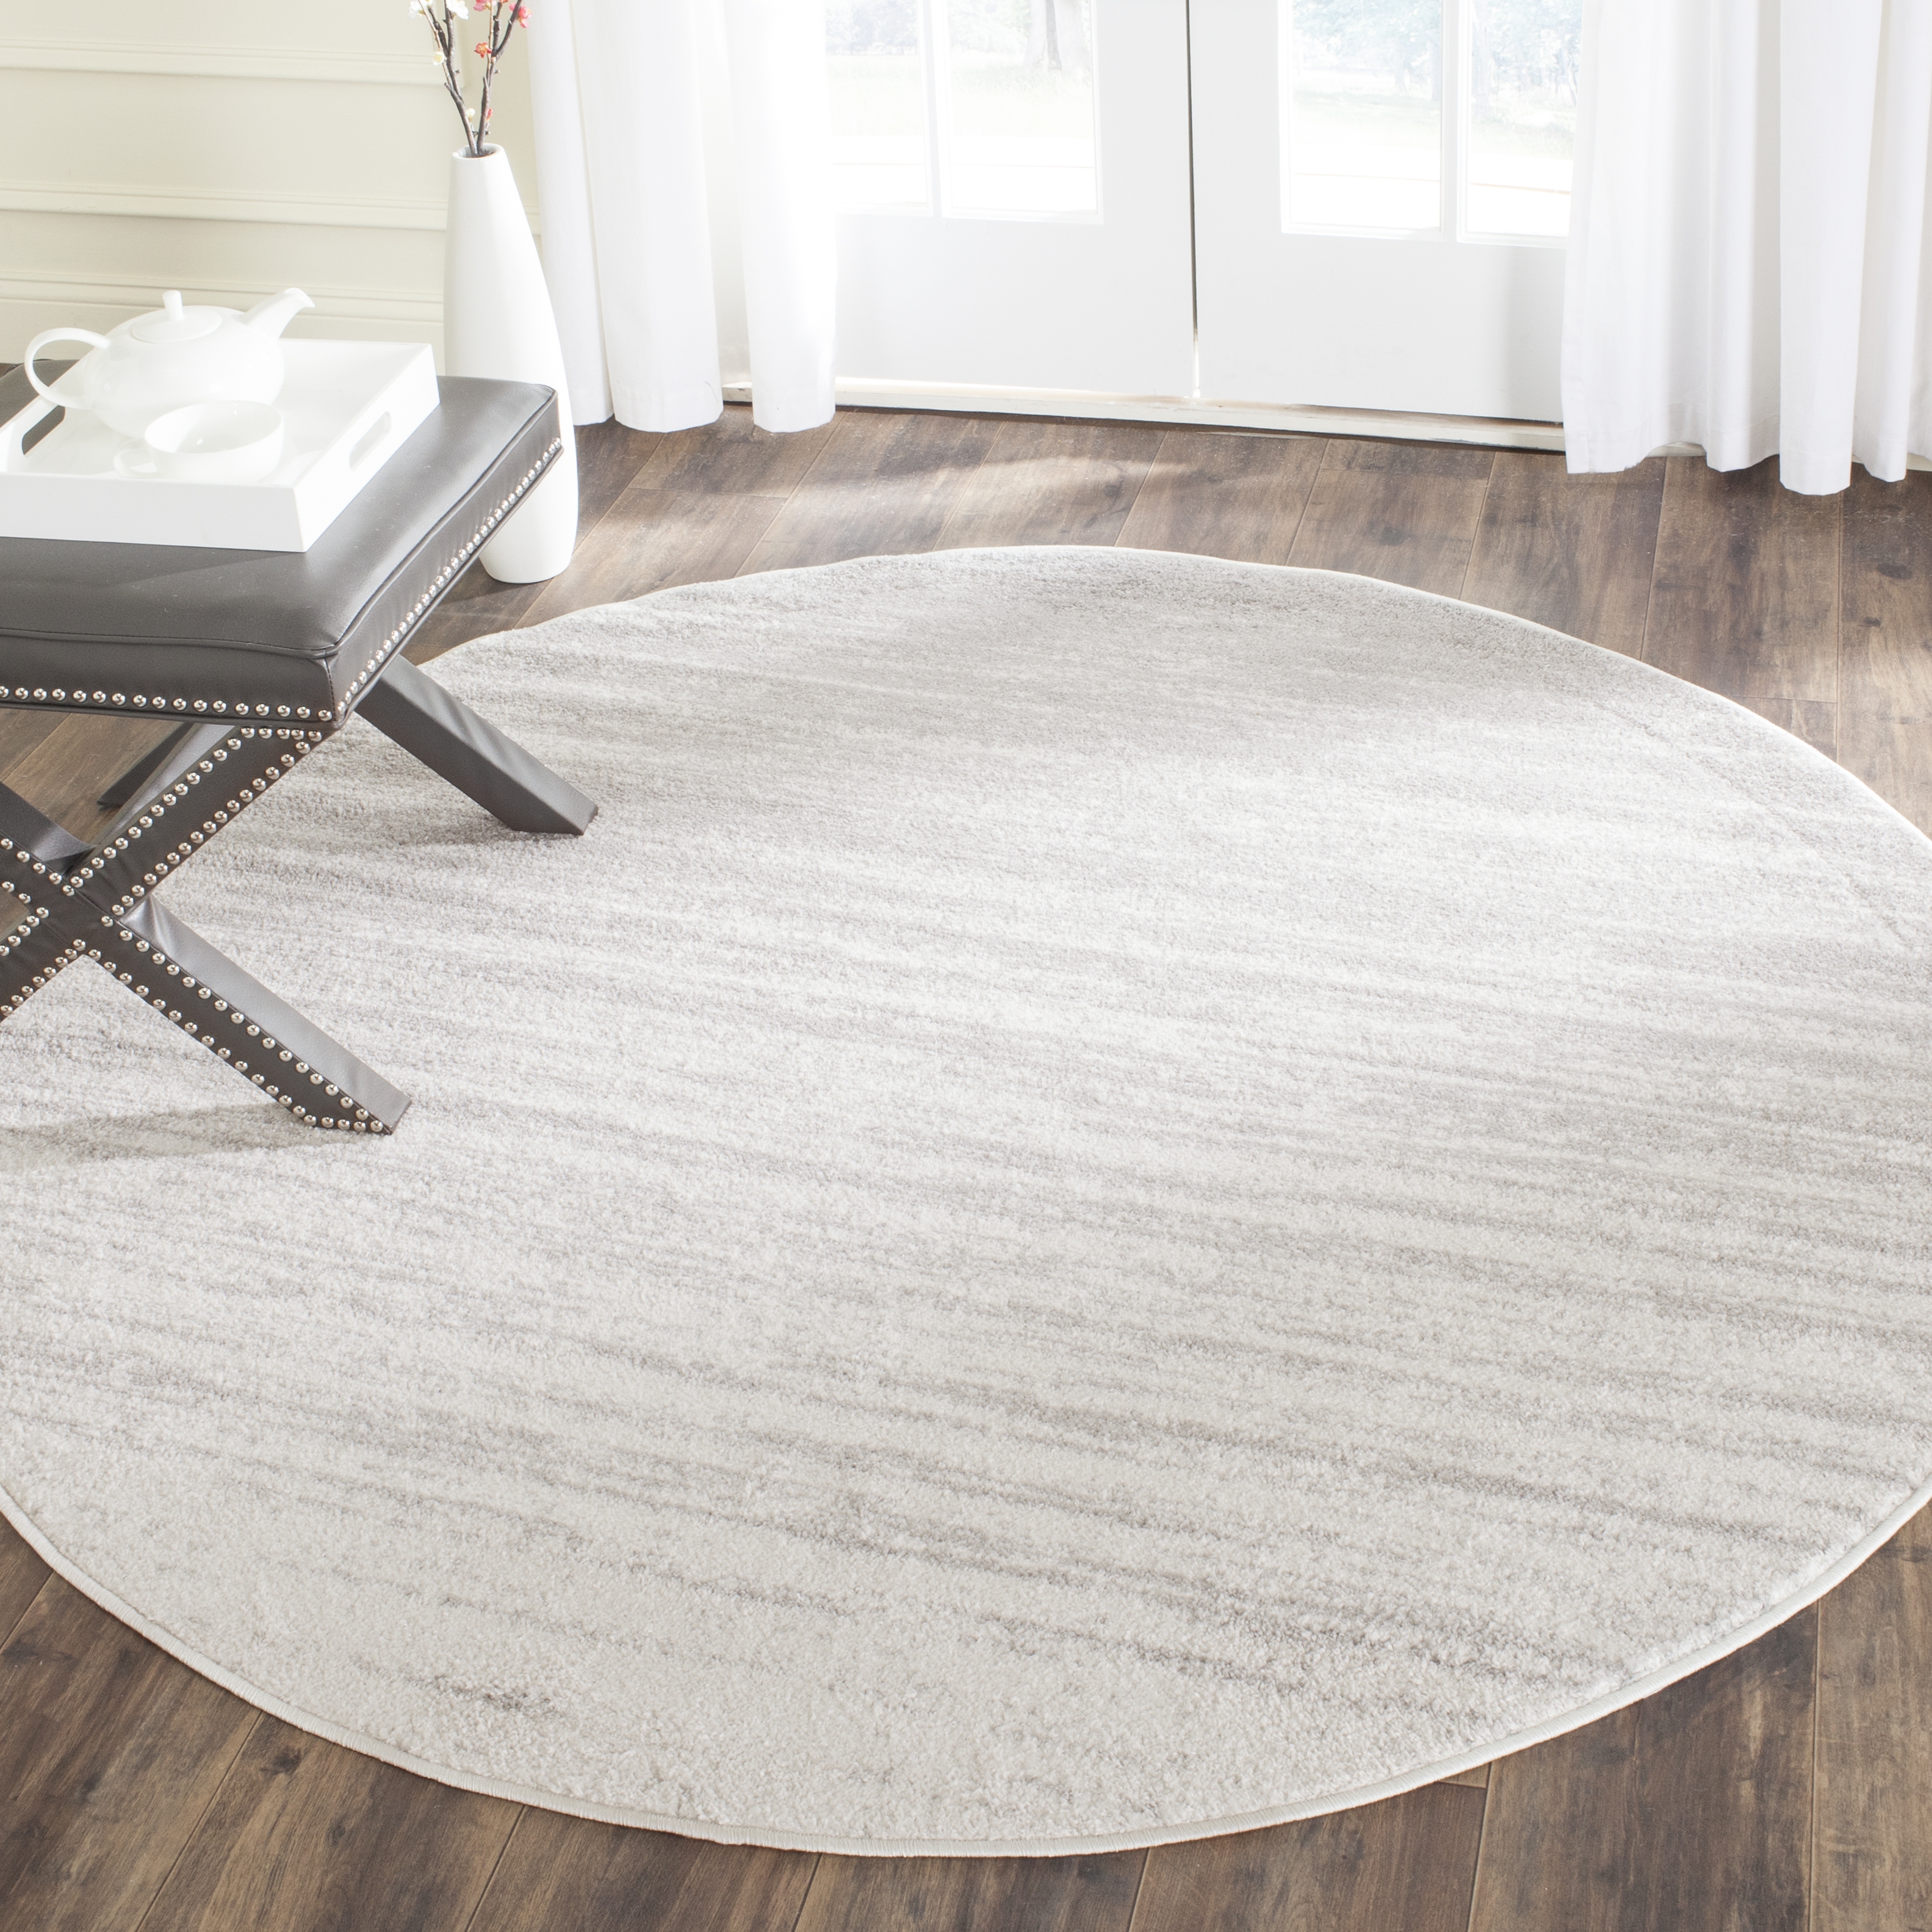 Arlo Home Woven Area Rug, ADR113B, Ivory/Silver,  9' X 9' Round - Image 1